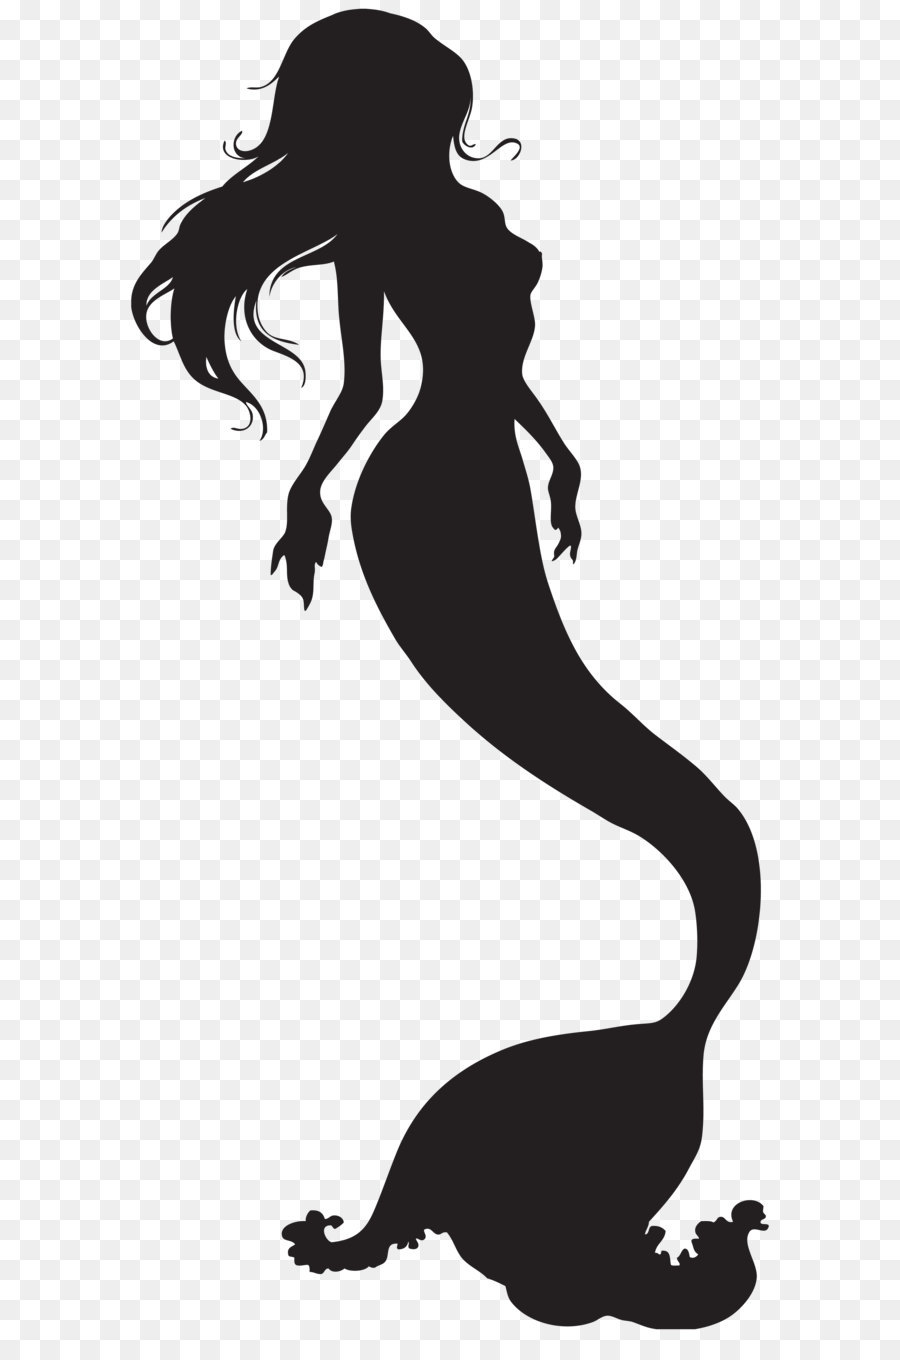 Mermaid Scalable Vector Graphics - Mermaid Silhouette PNG Clip Art Image png download - 3874*8000 - Free Transparent Ariel png Download.